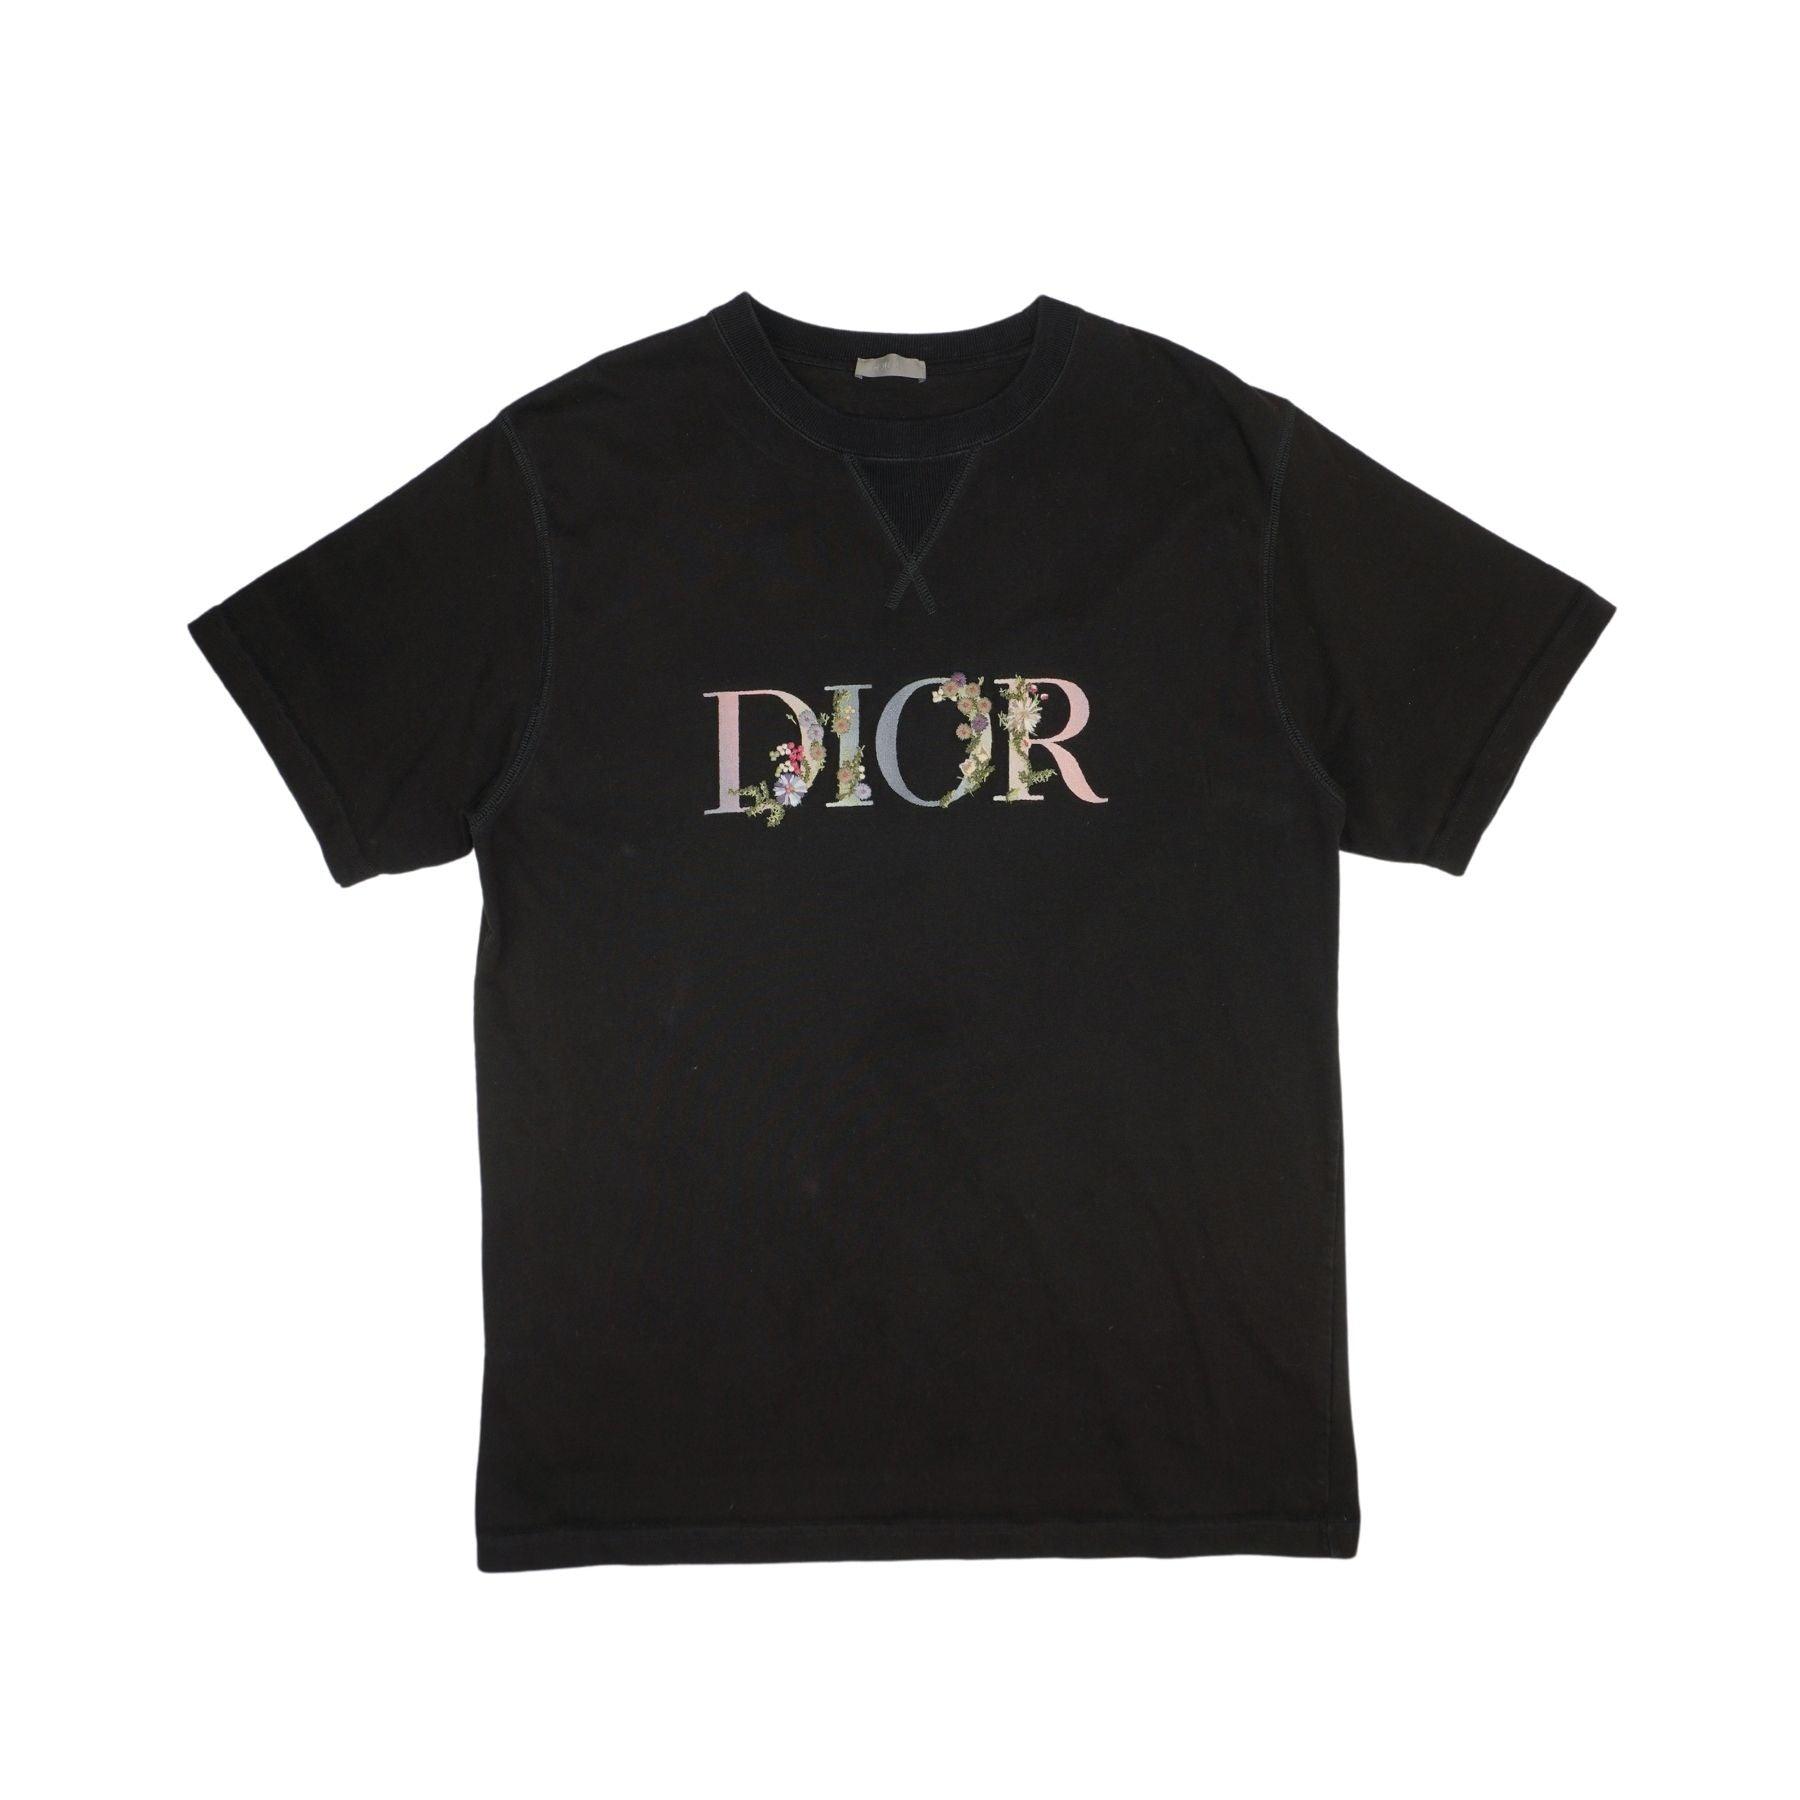 Christian Dior T-Shirt - Men's 3XL - Fashionably Yours